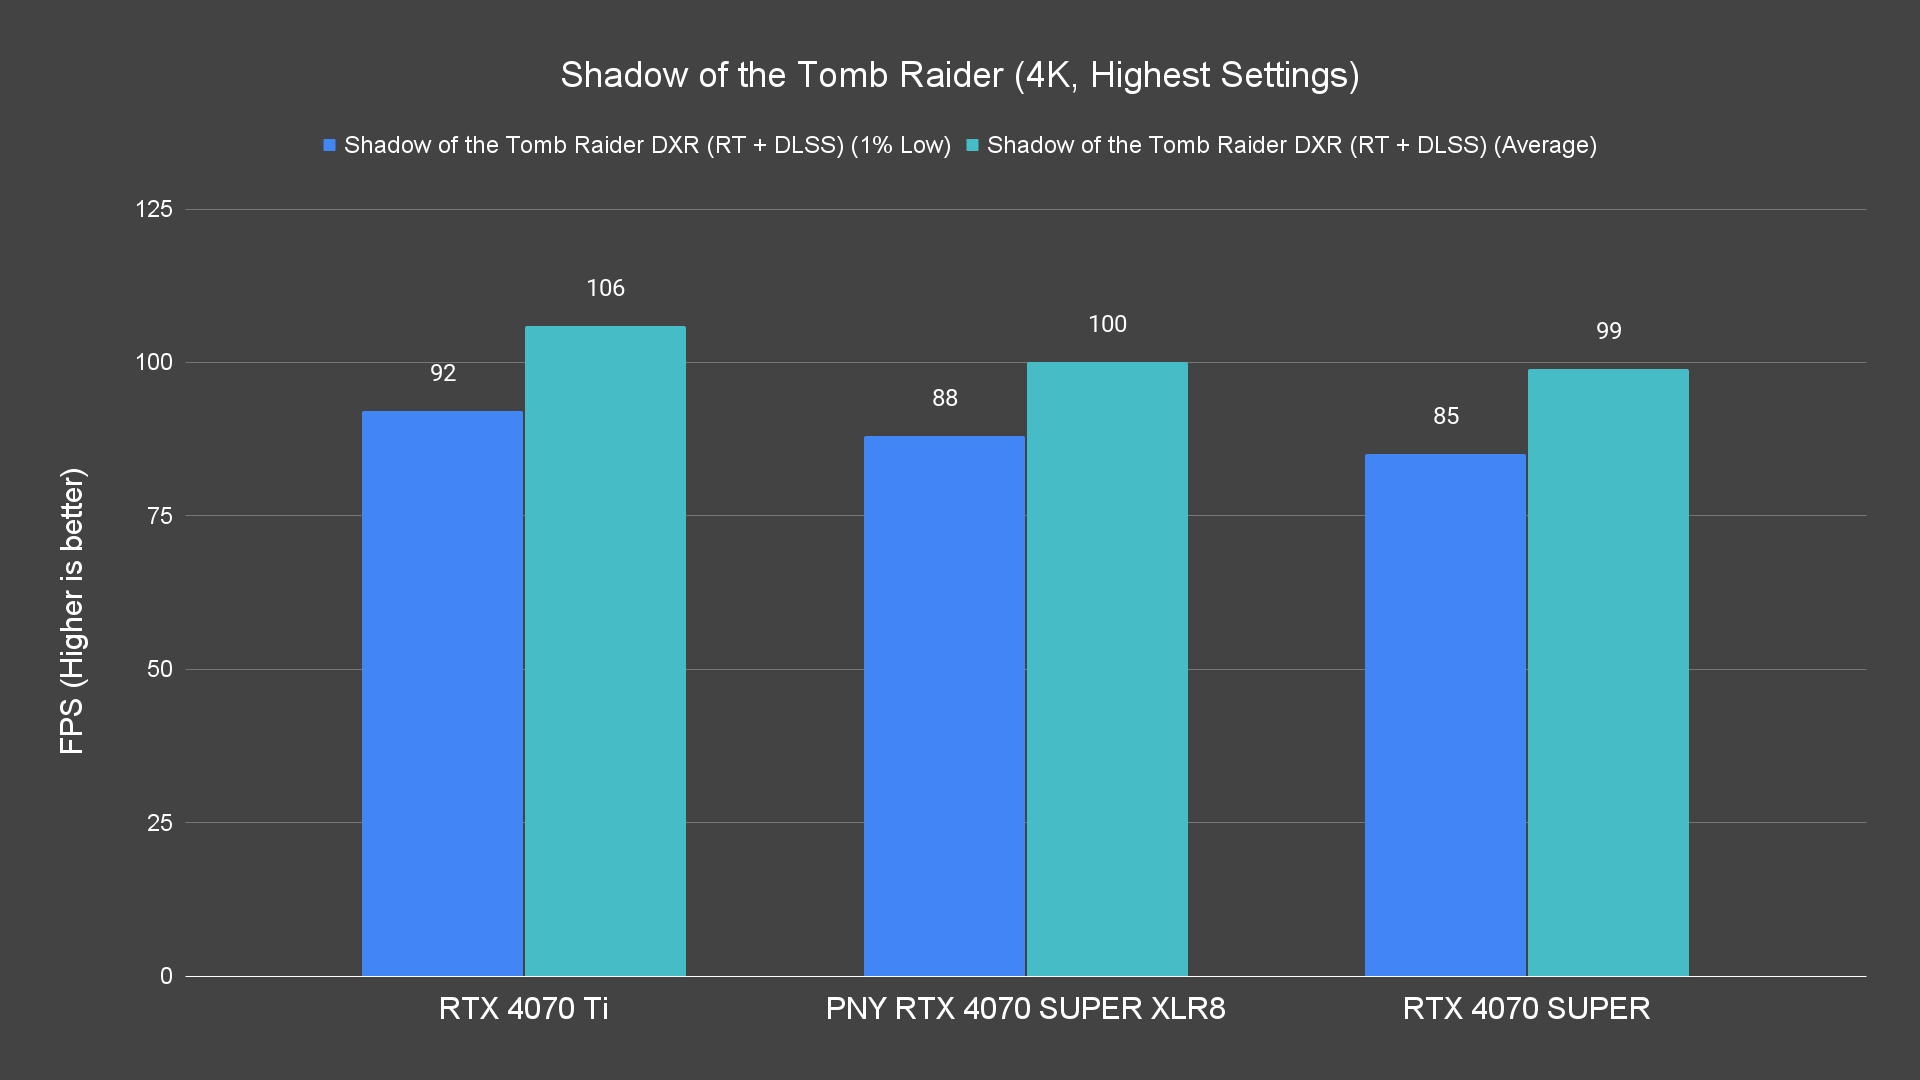 Shadow of the Tomb Raider (4K, Highest Settings) Ray Tracing PNY RTX 4070 SUPER XLR8